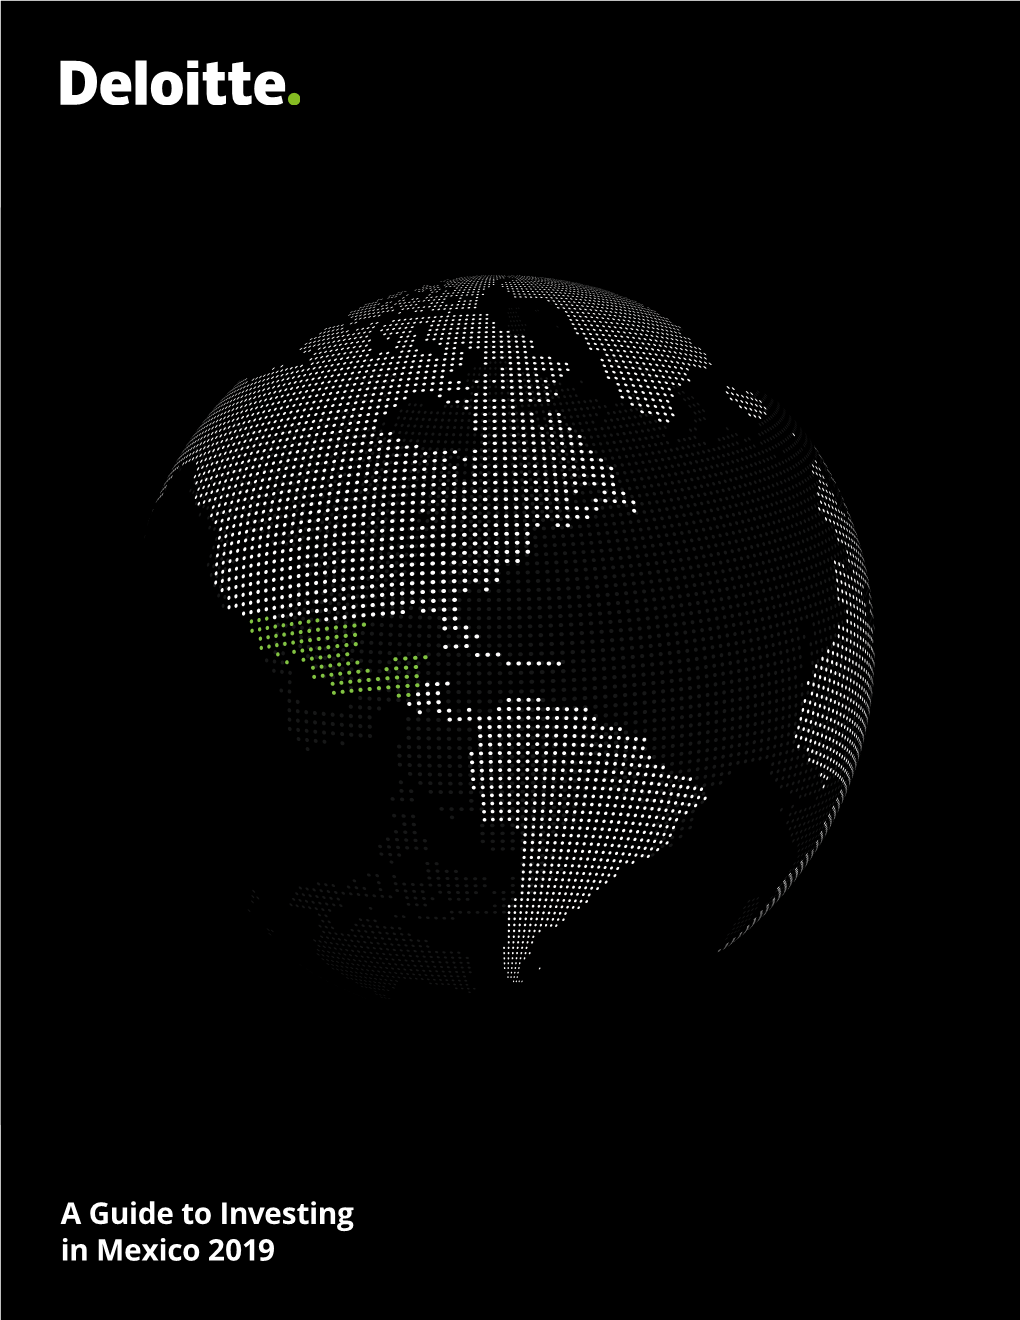 A Guide to Investing in Mexico 2019 | Deloitte